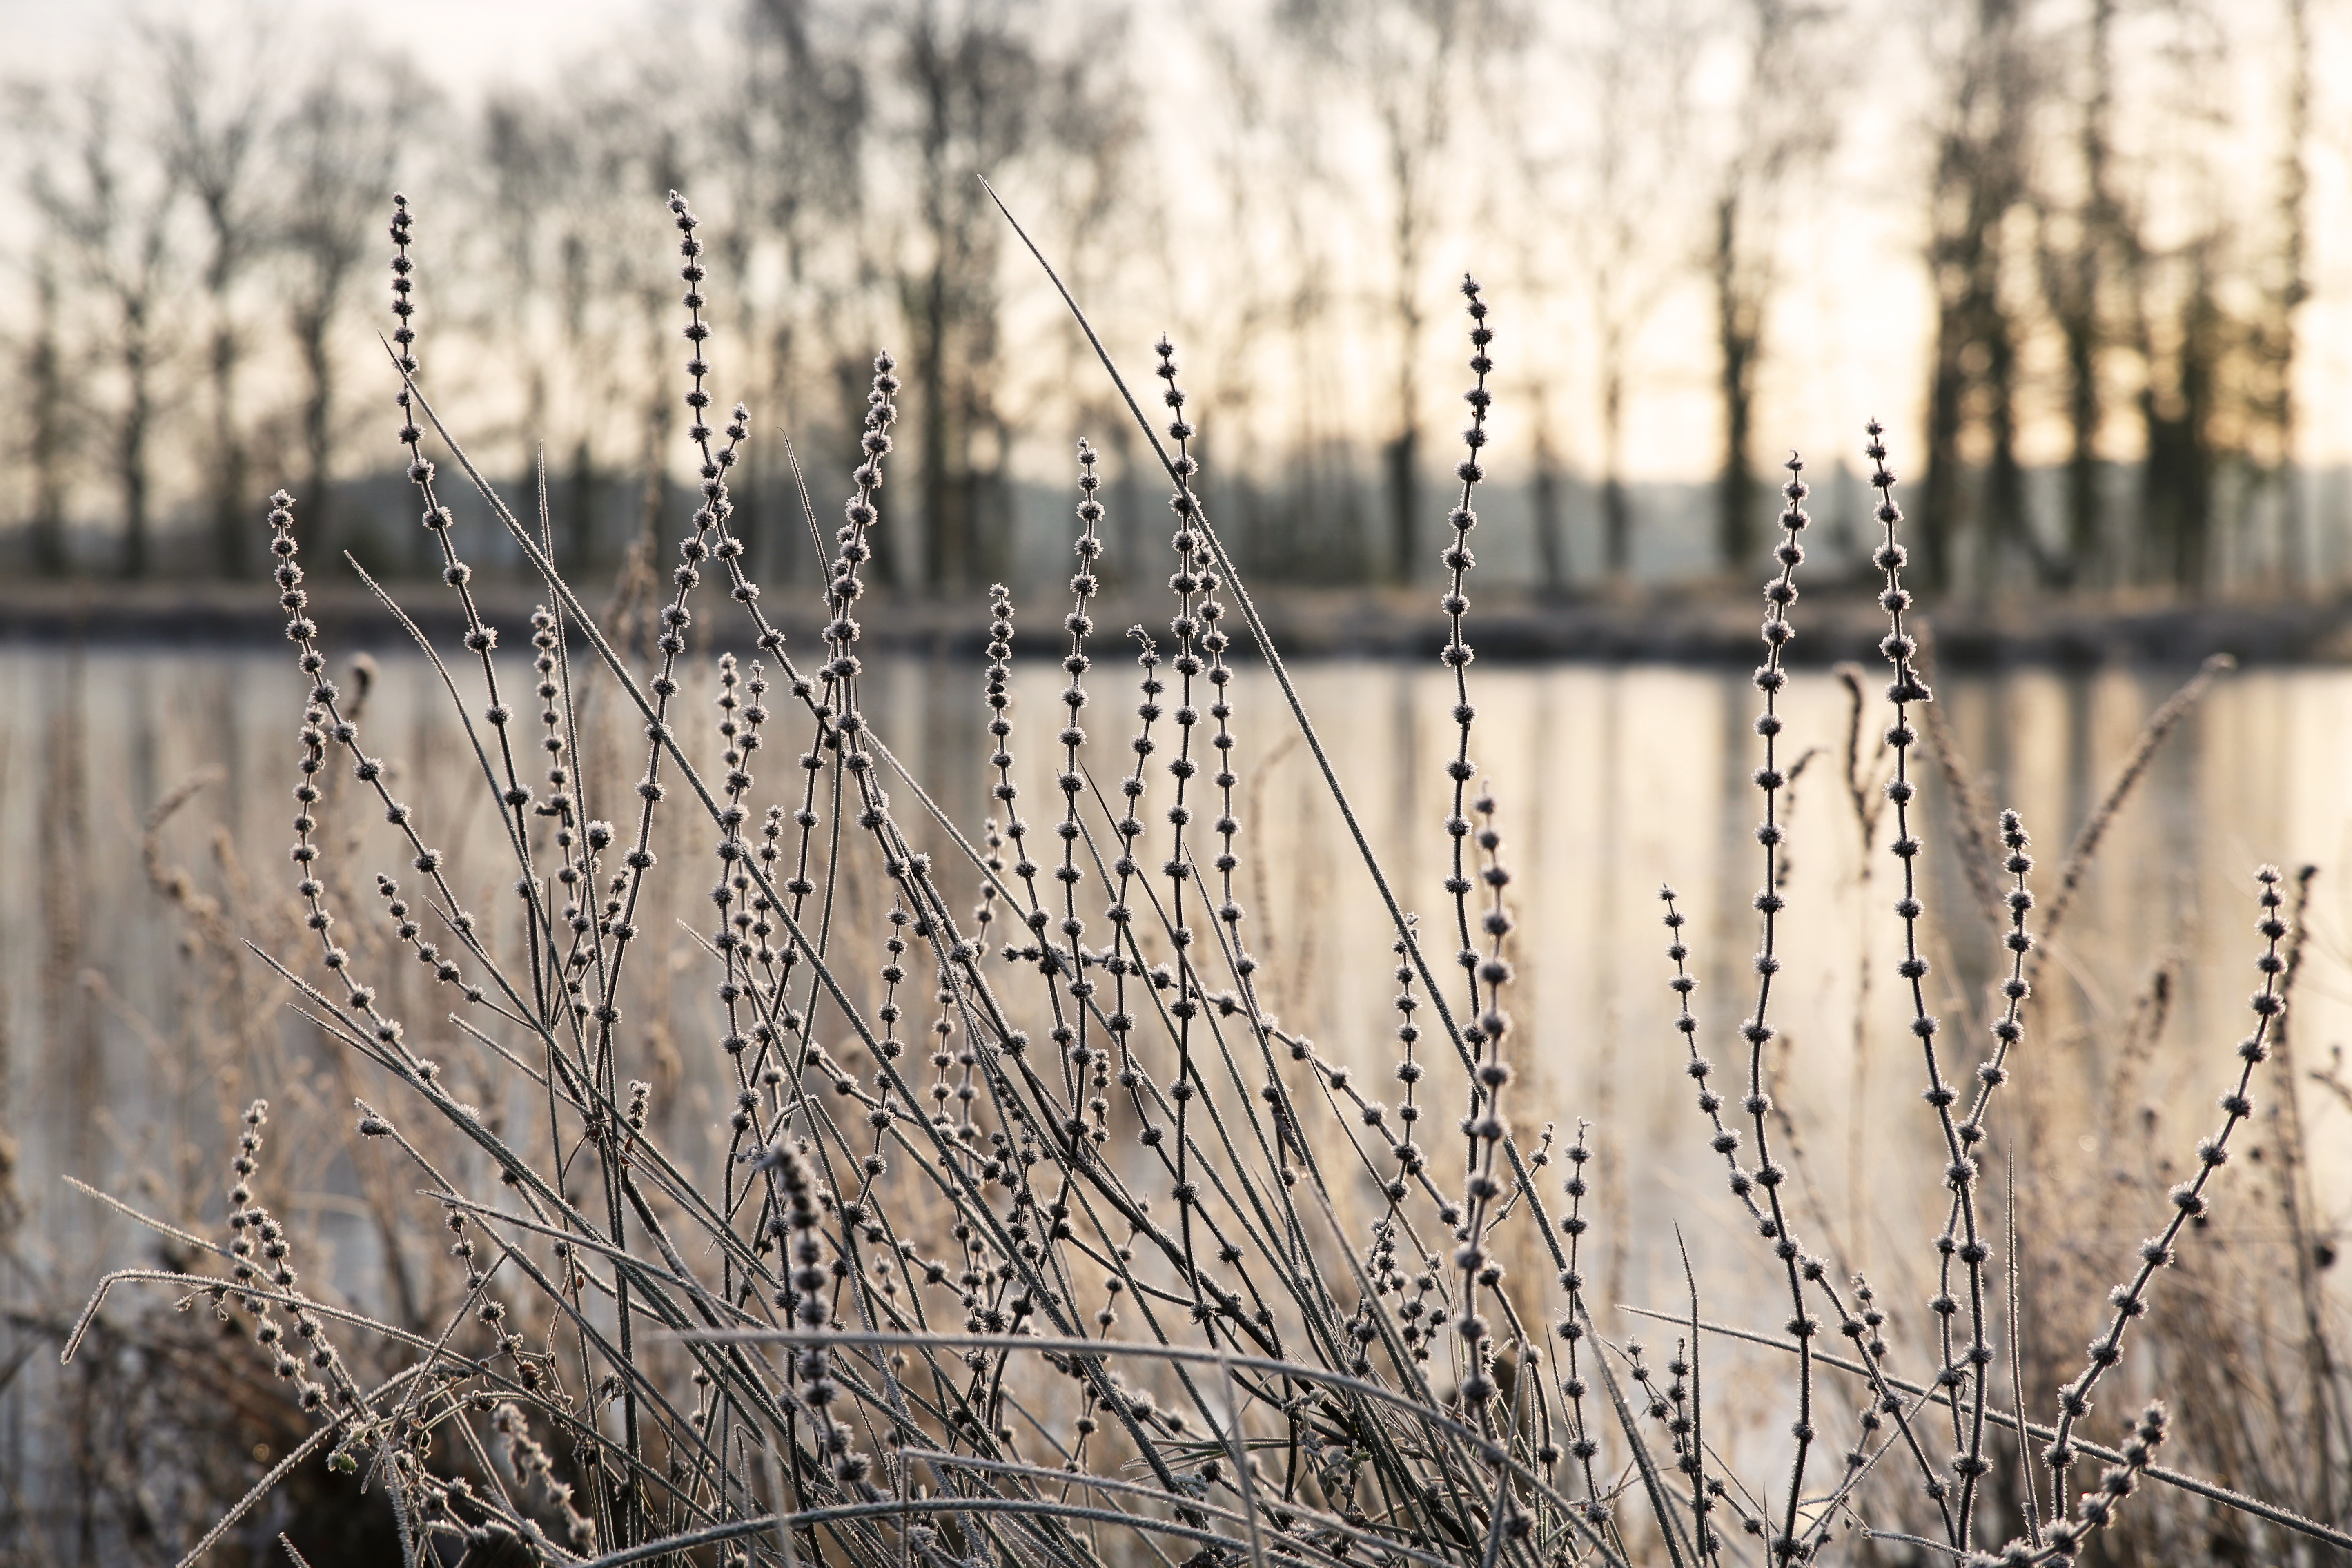 General 5760x3840 nature cold morning plants frost winter